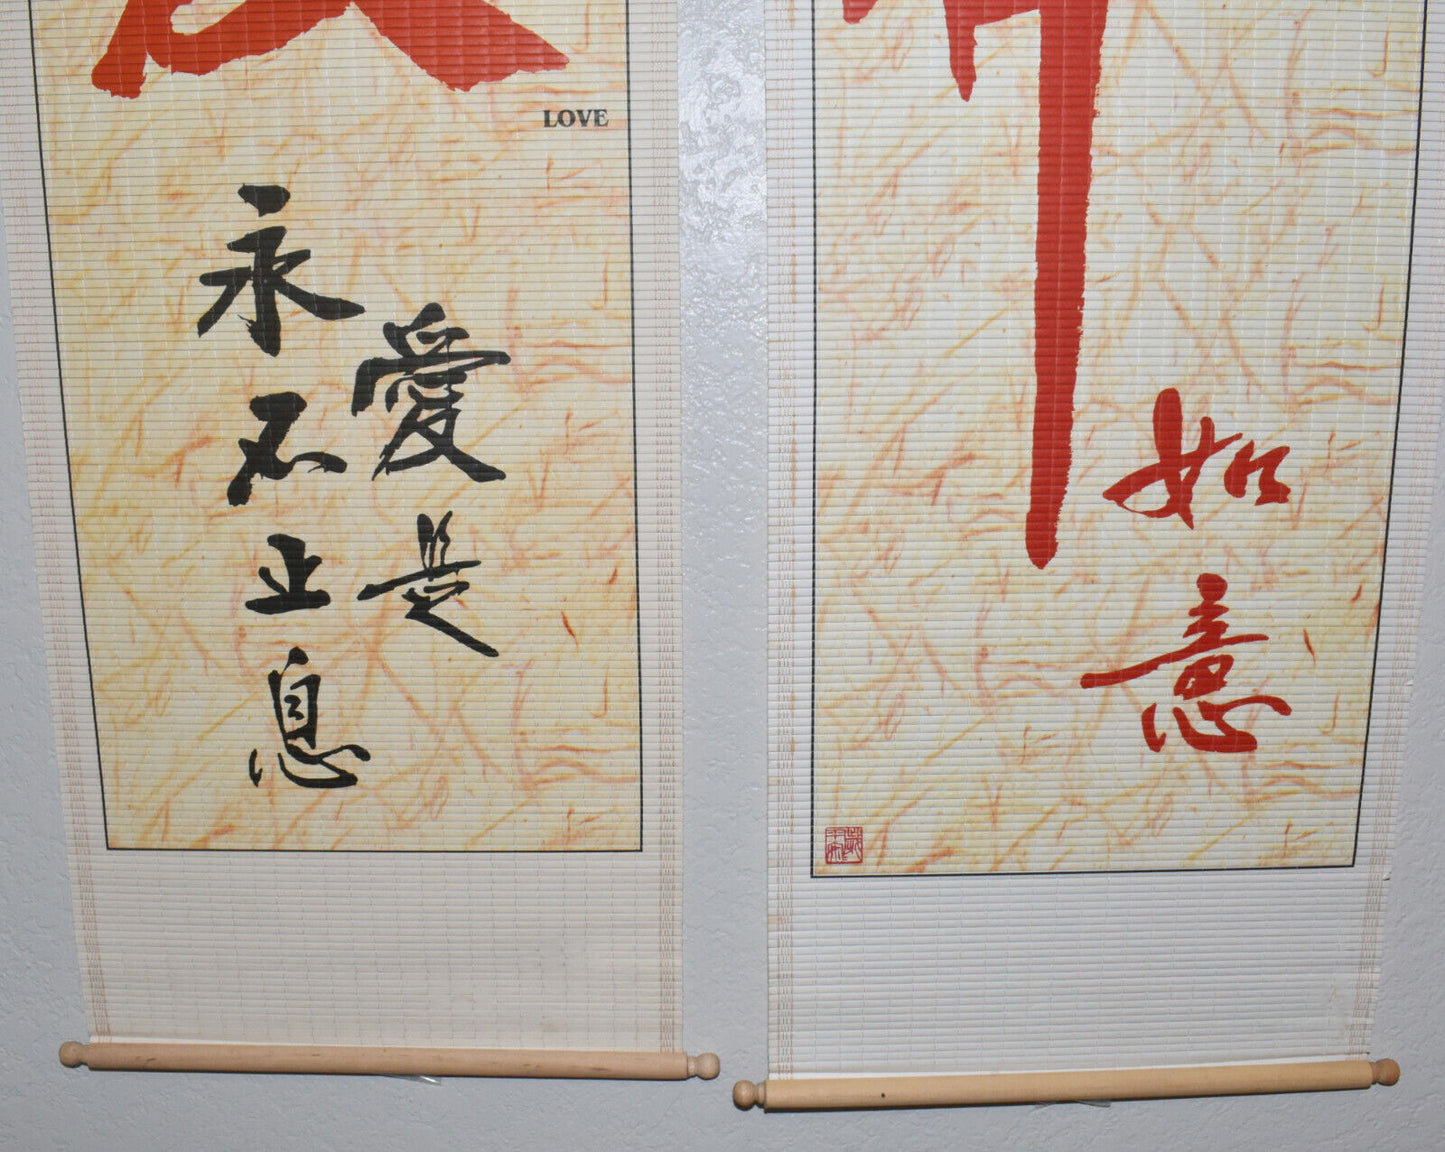 Pair Vintage Chinese Love Luck Wall Scrolls Asian Calligraphy Wall Hangings